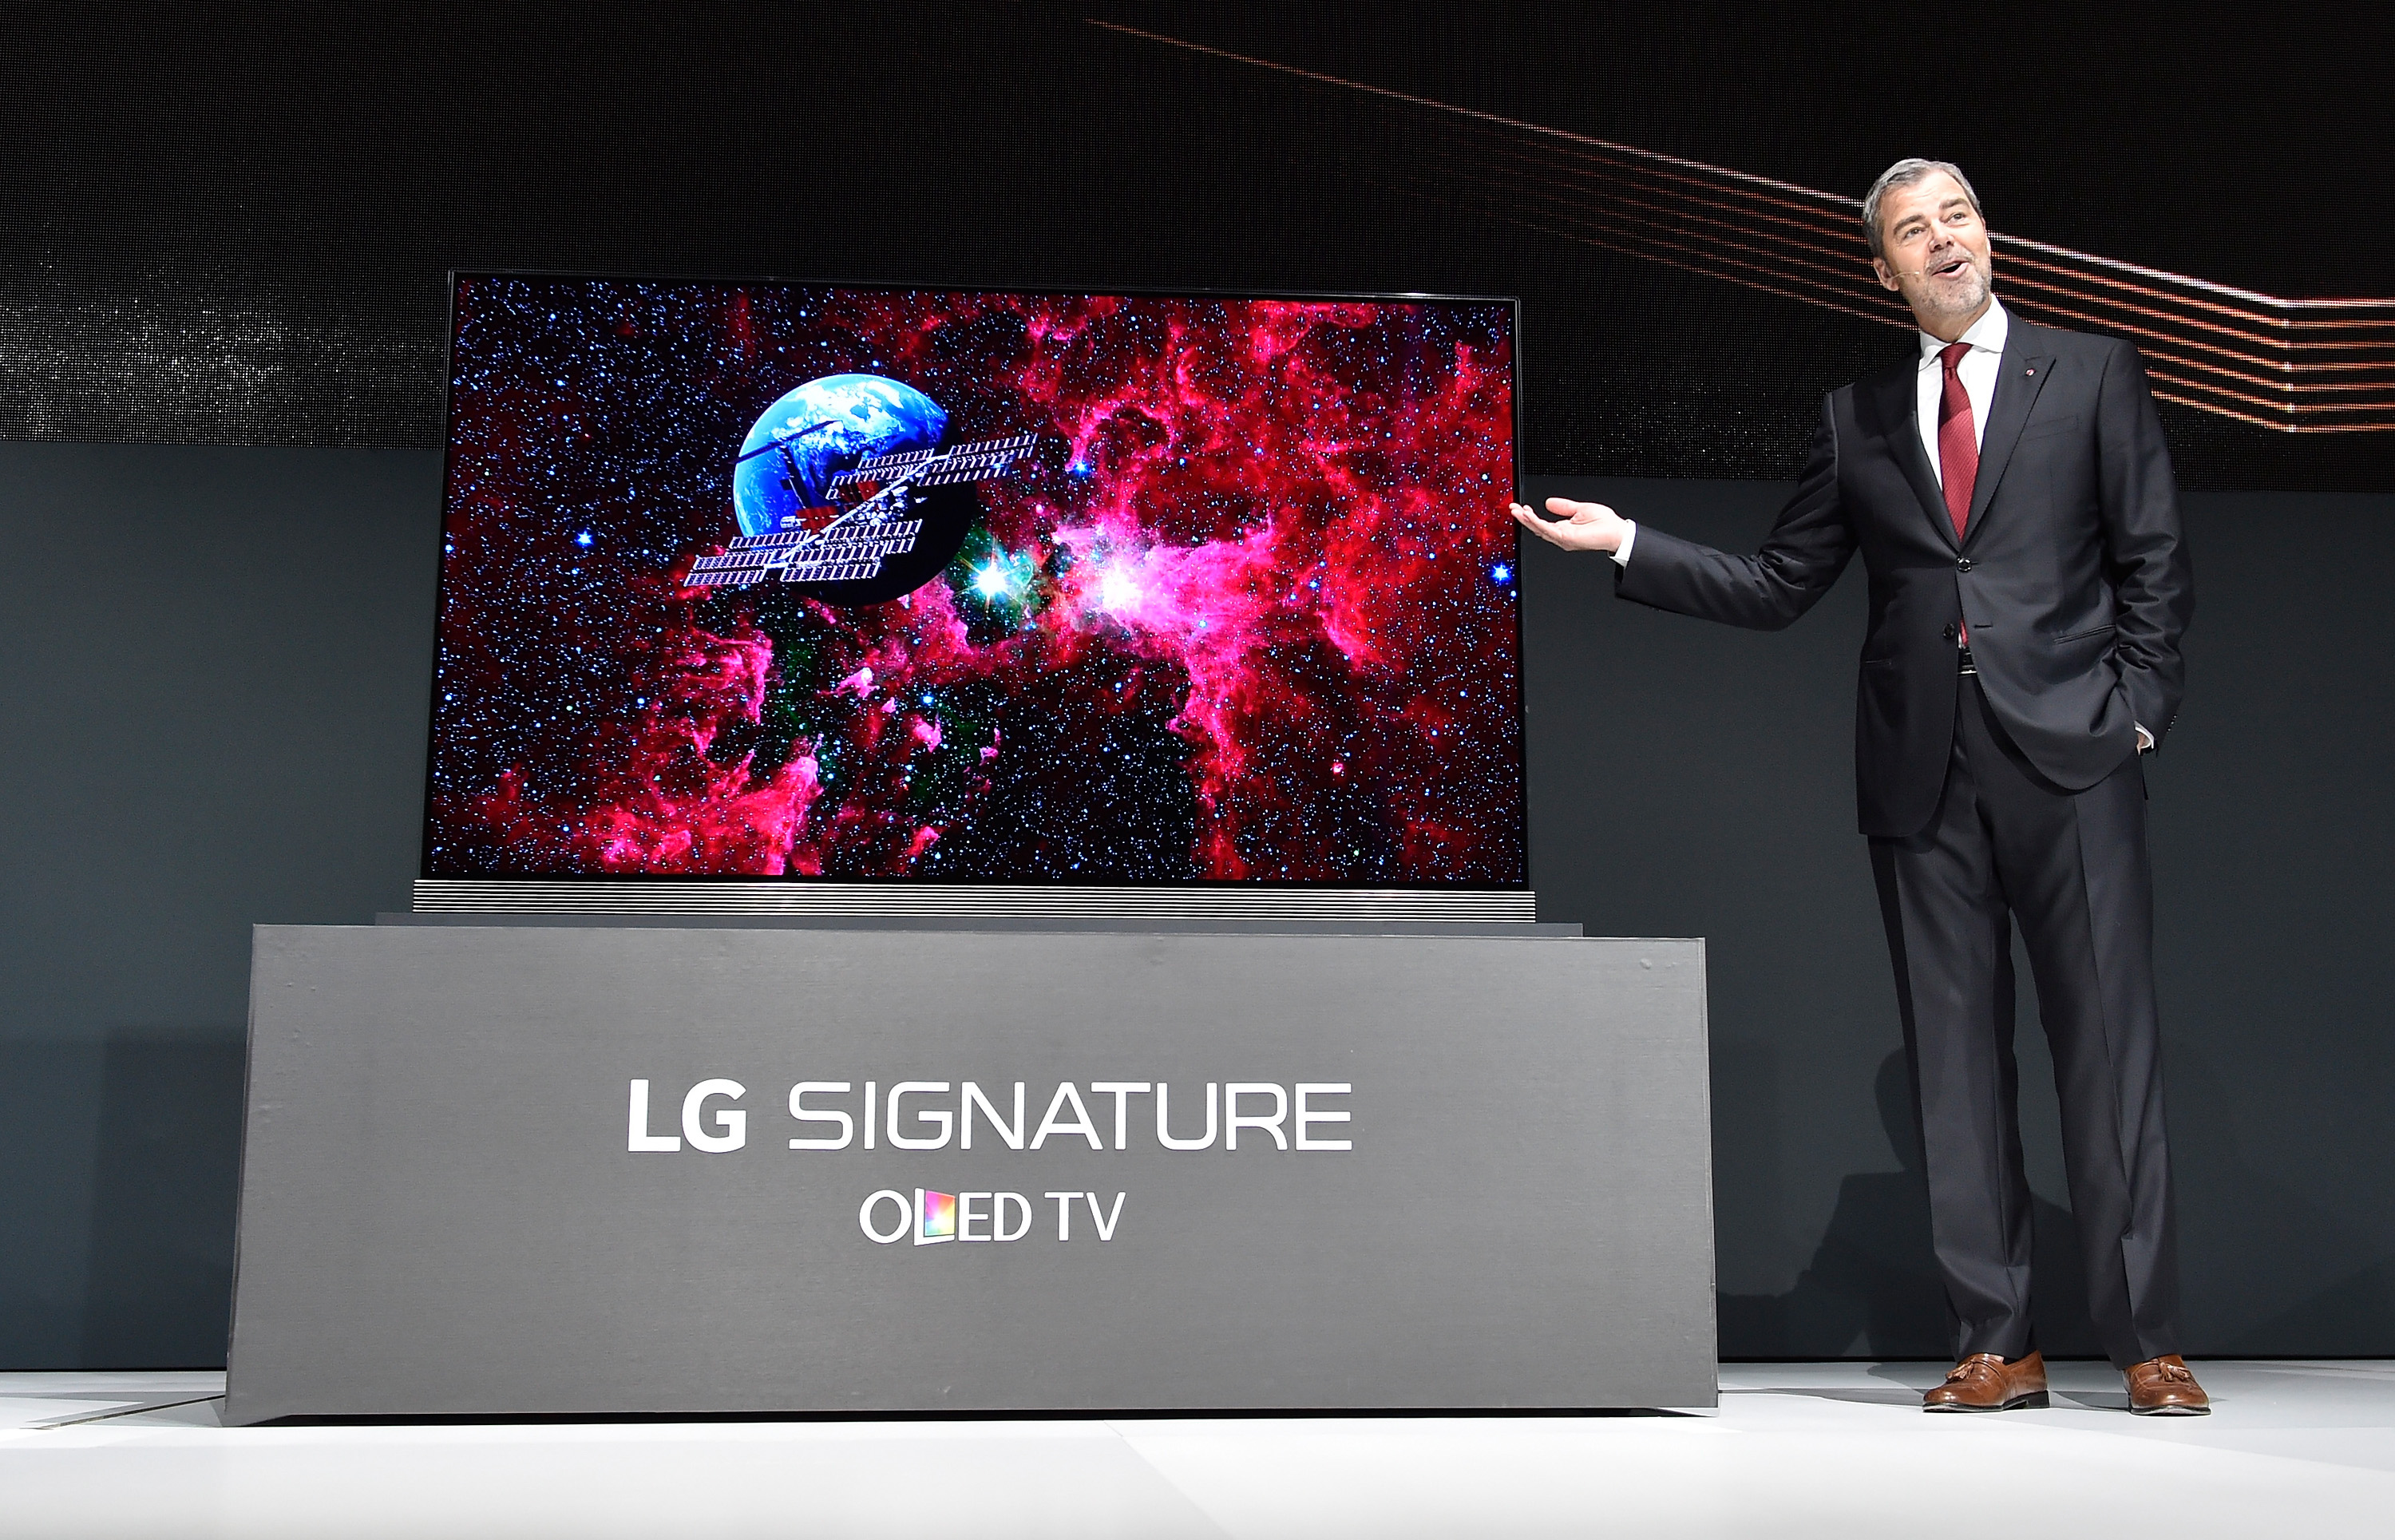 LG Electronics USA Vice President of Marketing David VanderWaal gestures as he displays the LG Signature 77 inch 4K HDR-enabled OLED TV during a press event for CES 2016 at the Mandalay Bay Convention Center on January 5, 2016 in Las Vegas, Nevada. (David Becker&mdash;Getty Images)